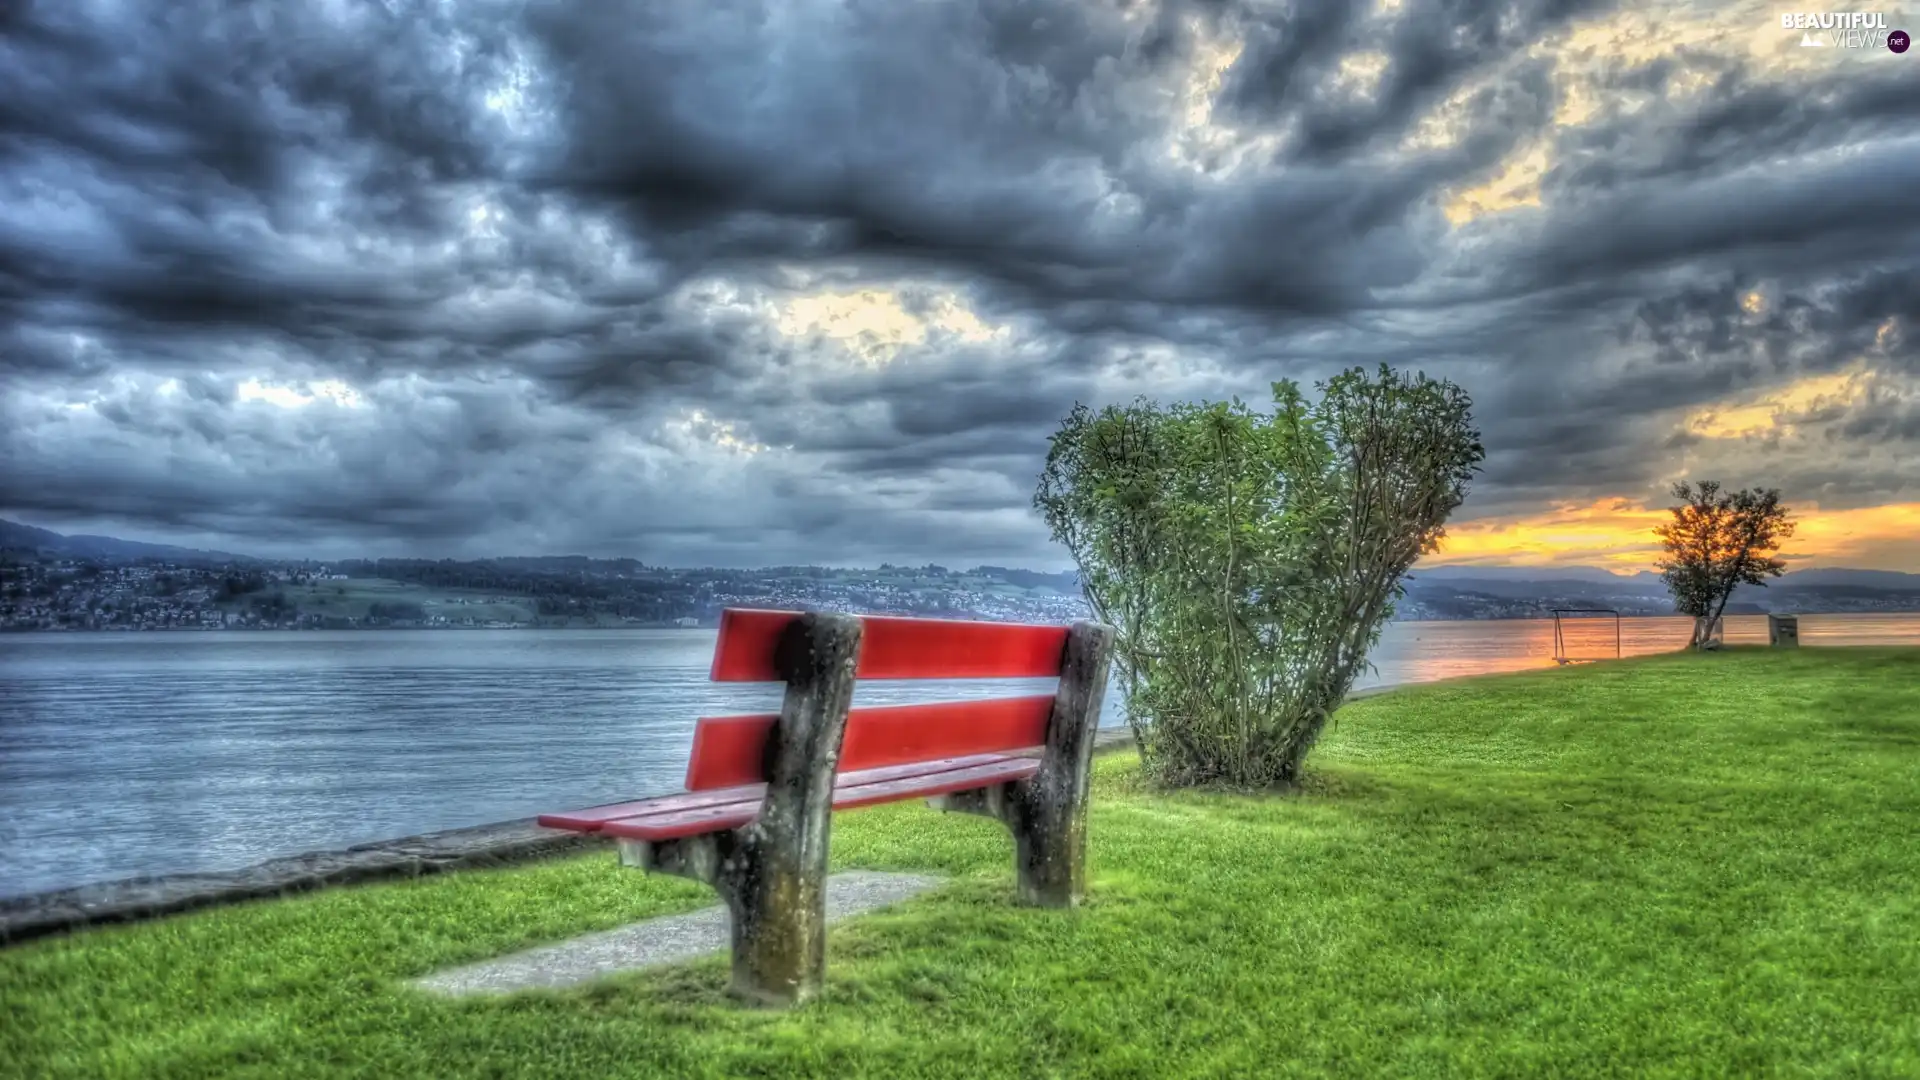 clouds, grass, Bench, River